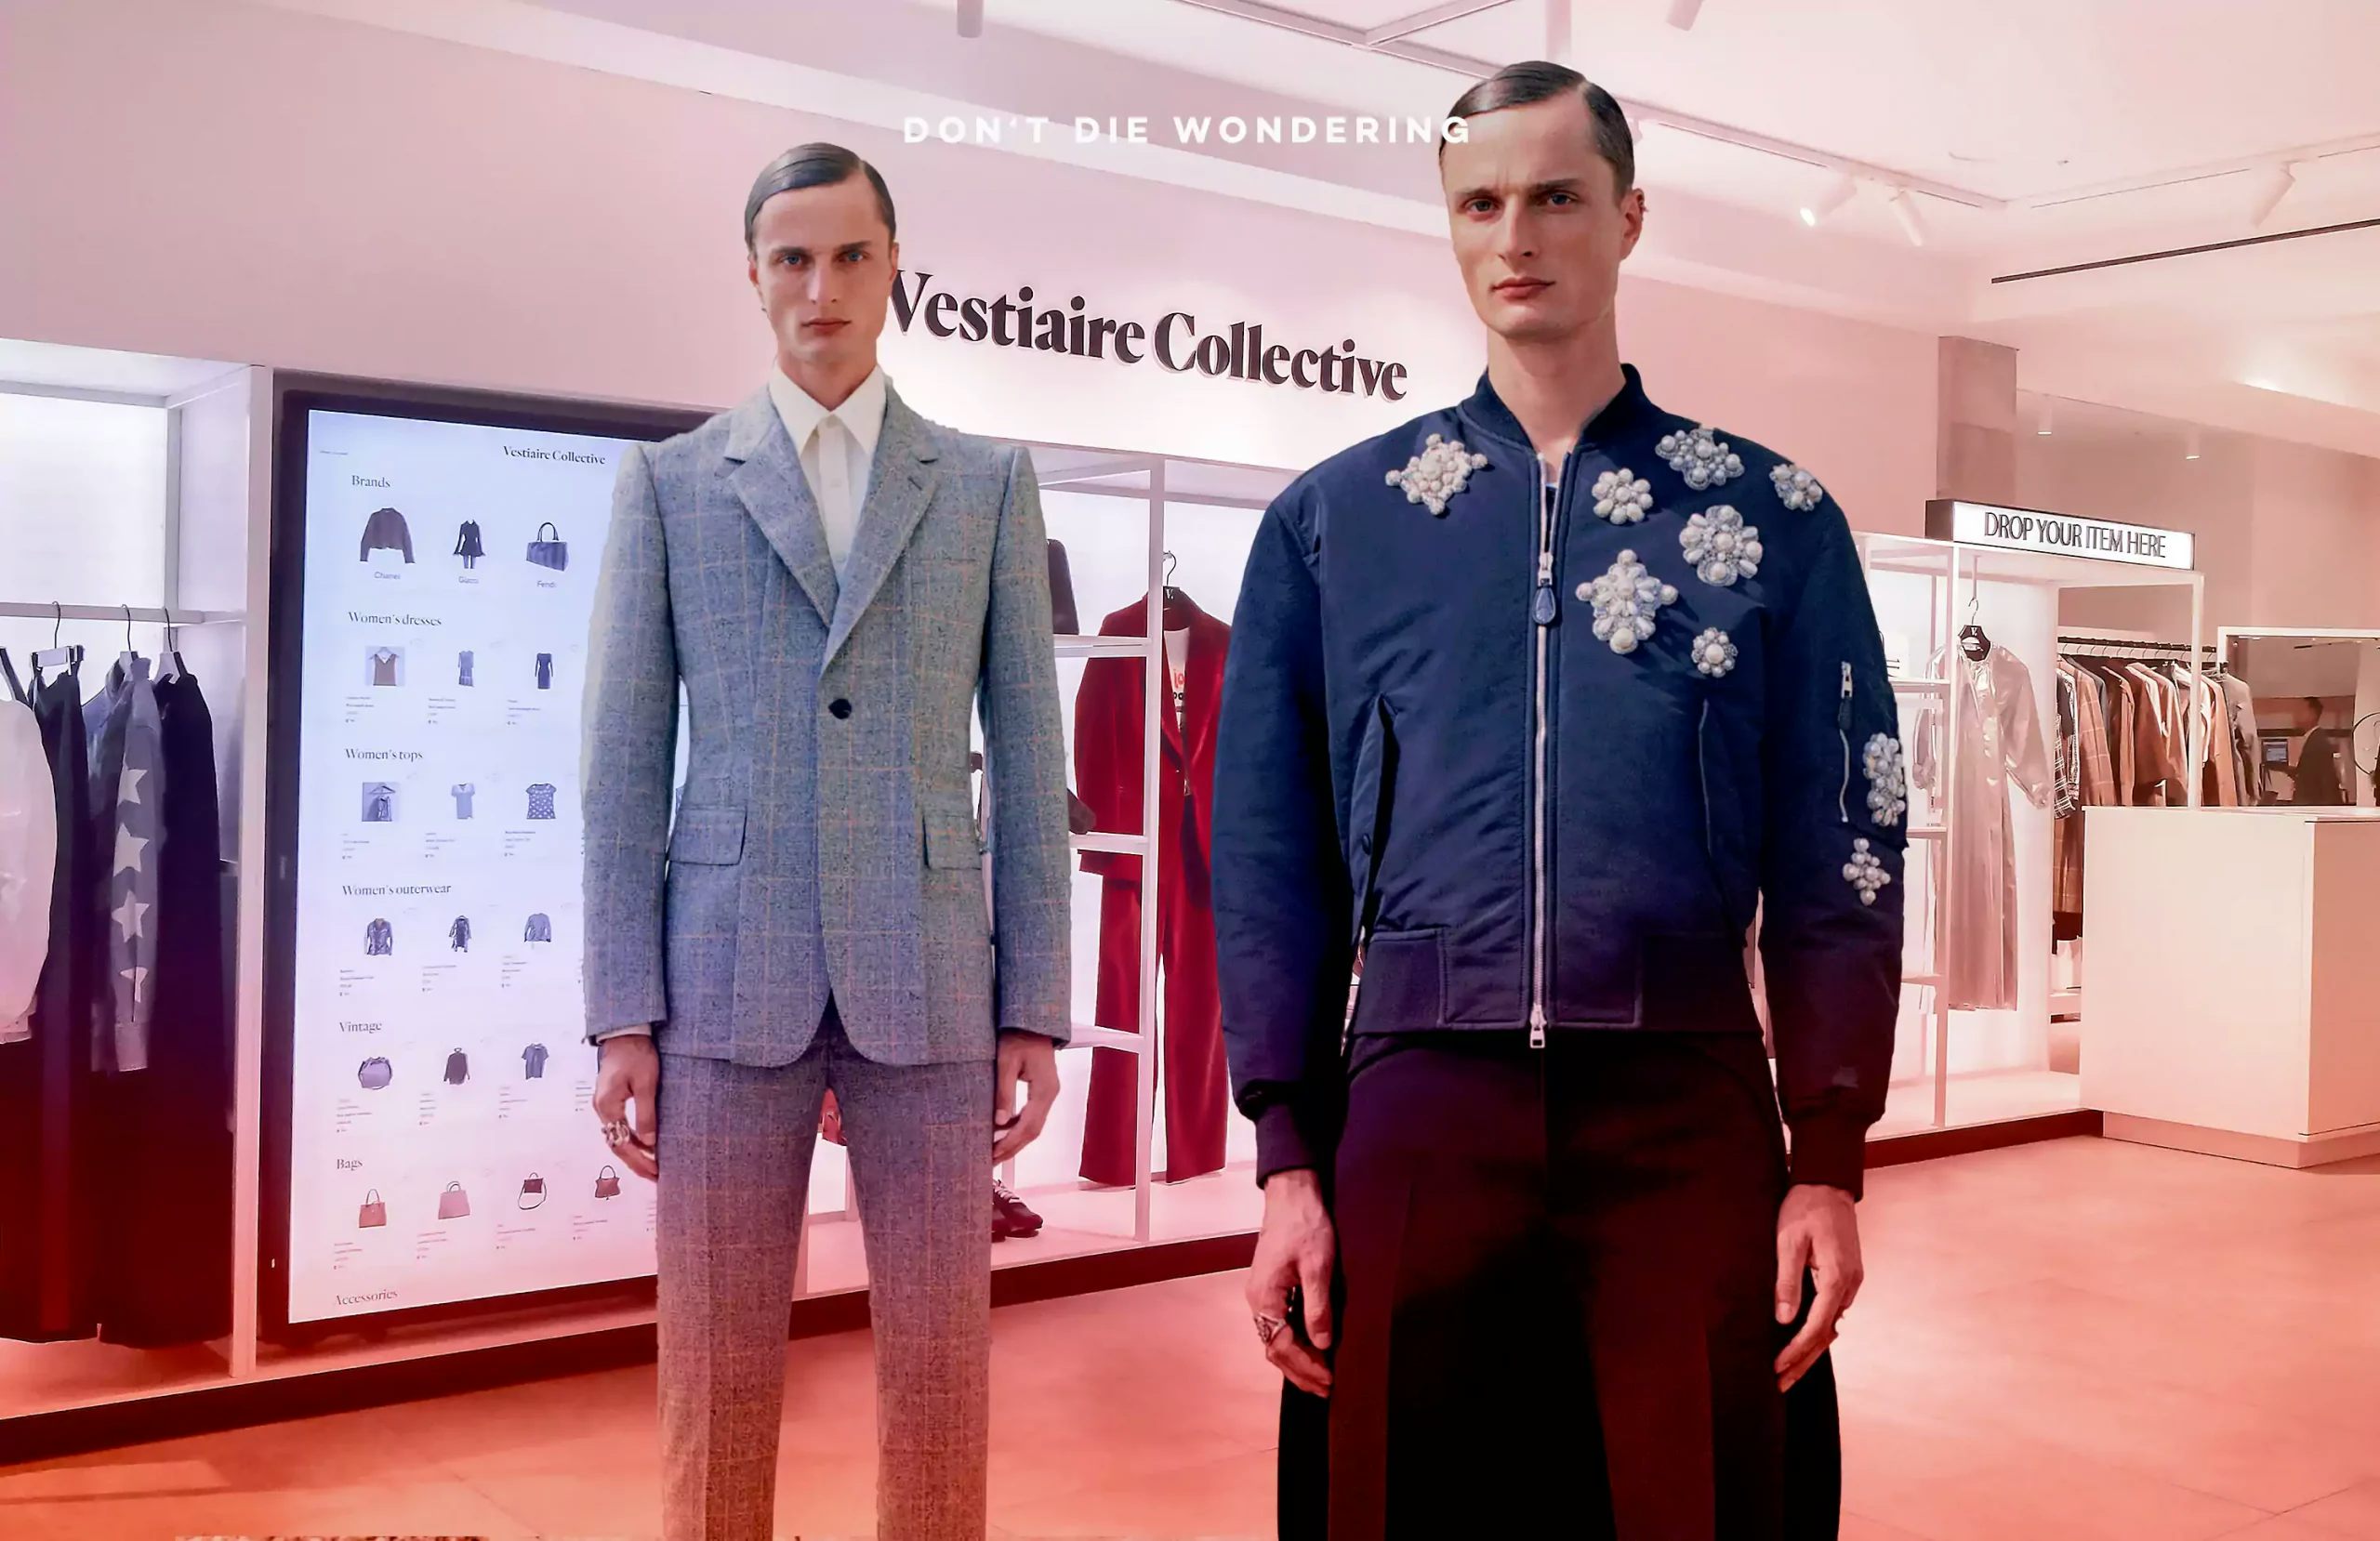 DDW’s Best Finds on Vestiaire Collective for July 2022